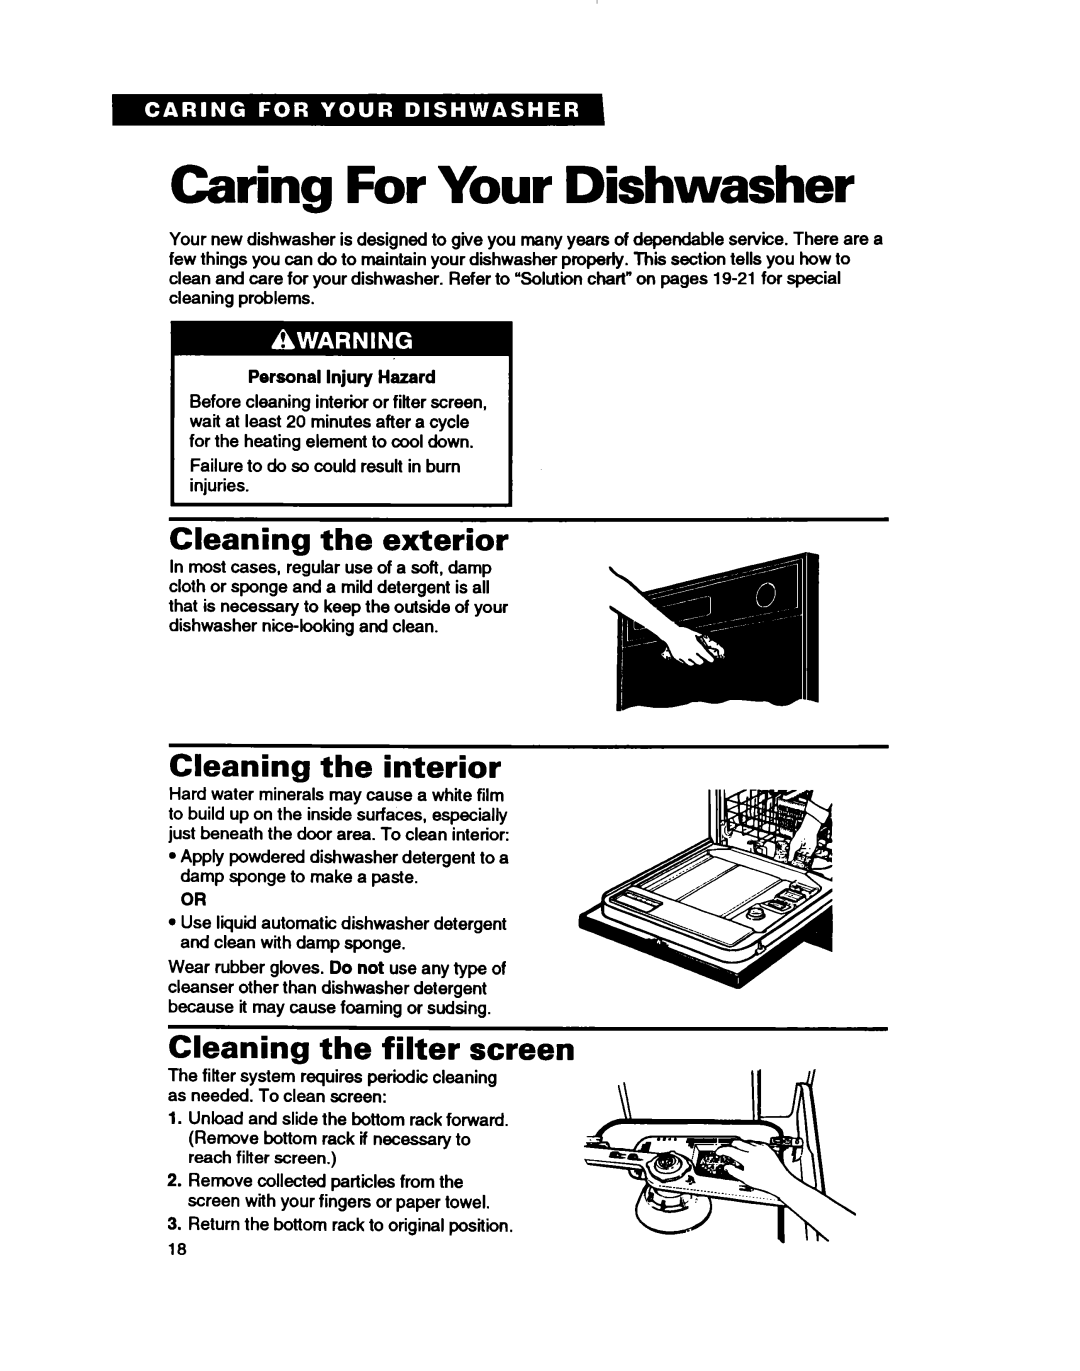 Whirlpool WU5750 Caring For Your Dishwasher, Cleaning the interior, Cleaning the filter screen, Personal Injury Hazard 